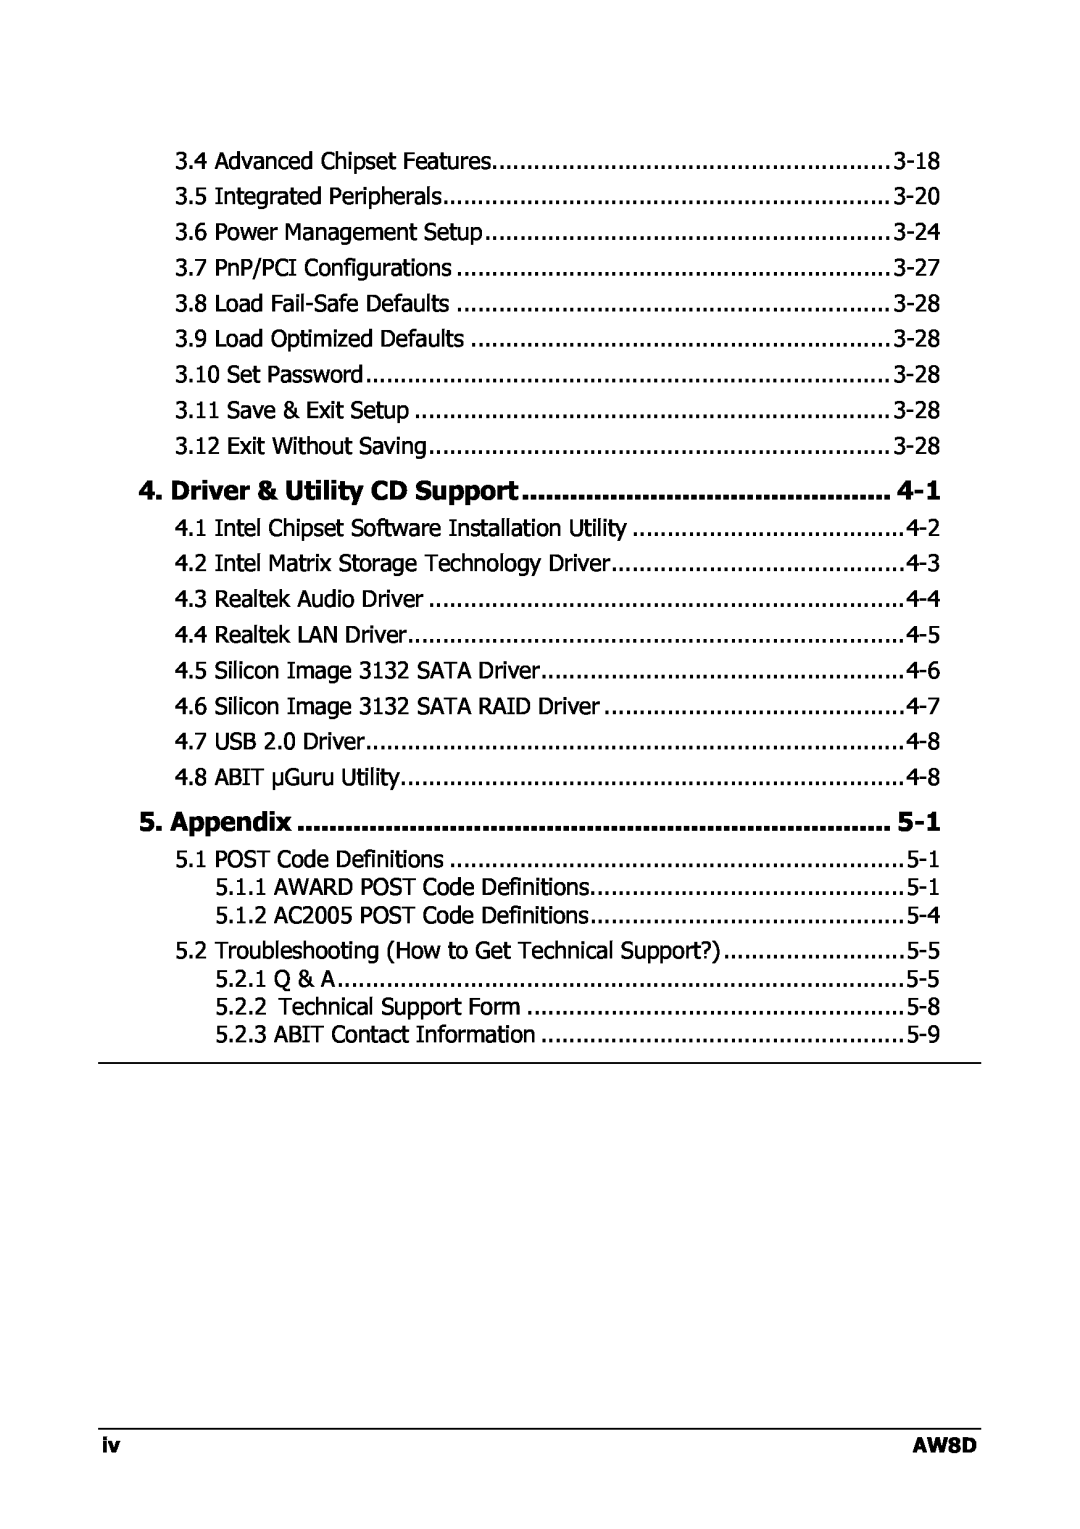 Intel AW8D user manual Driver & Utility CD Support, Appendix 